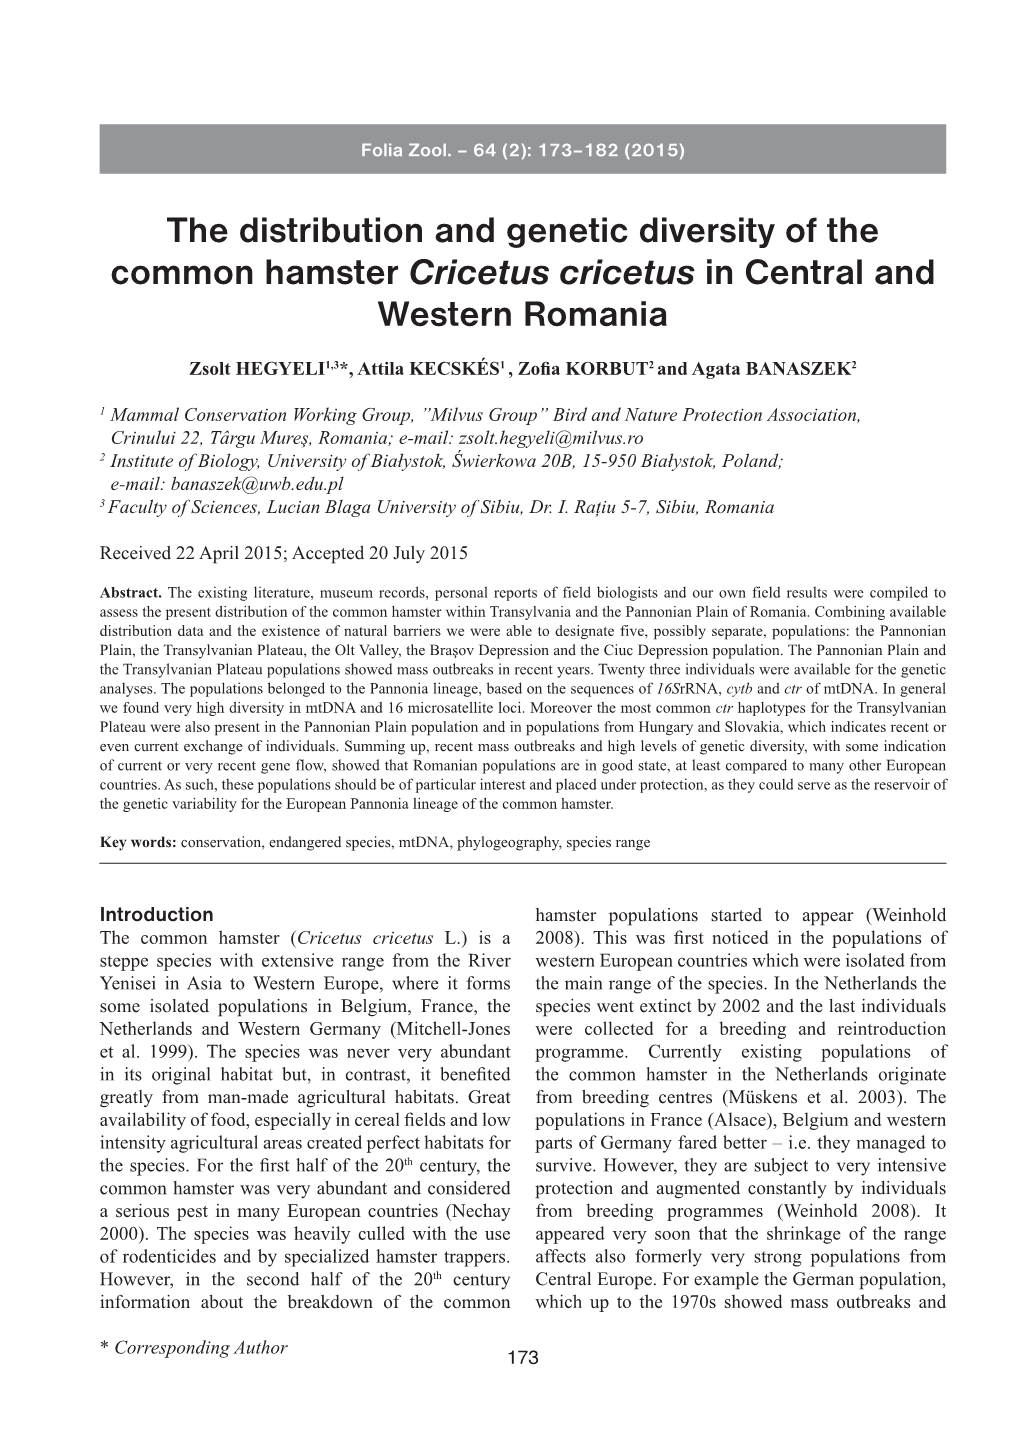 The Distribution and Genetic Diversity of the Common Hamster Cricetus Cricetus in Central and Western Romania